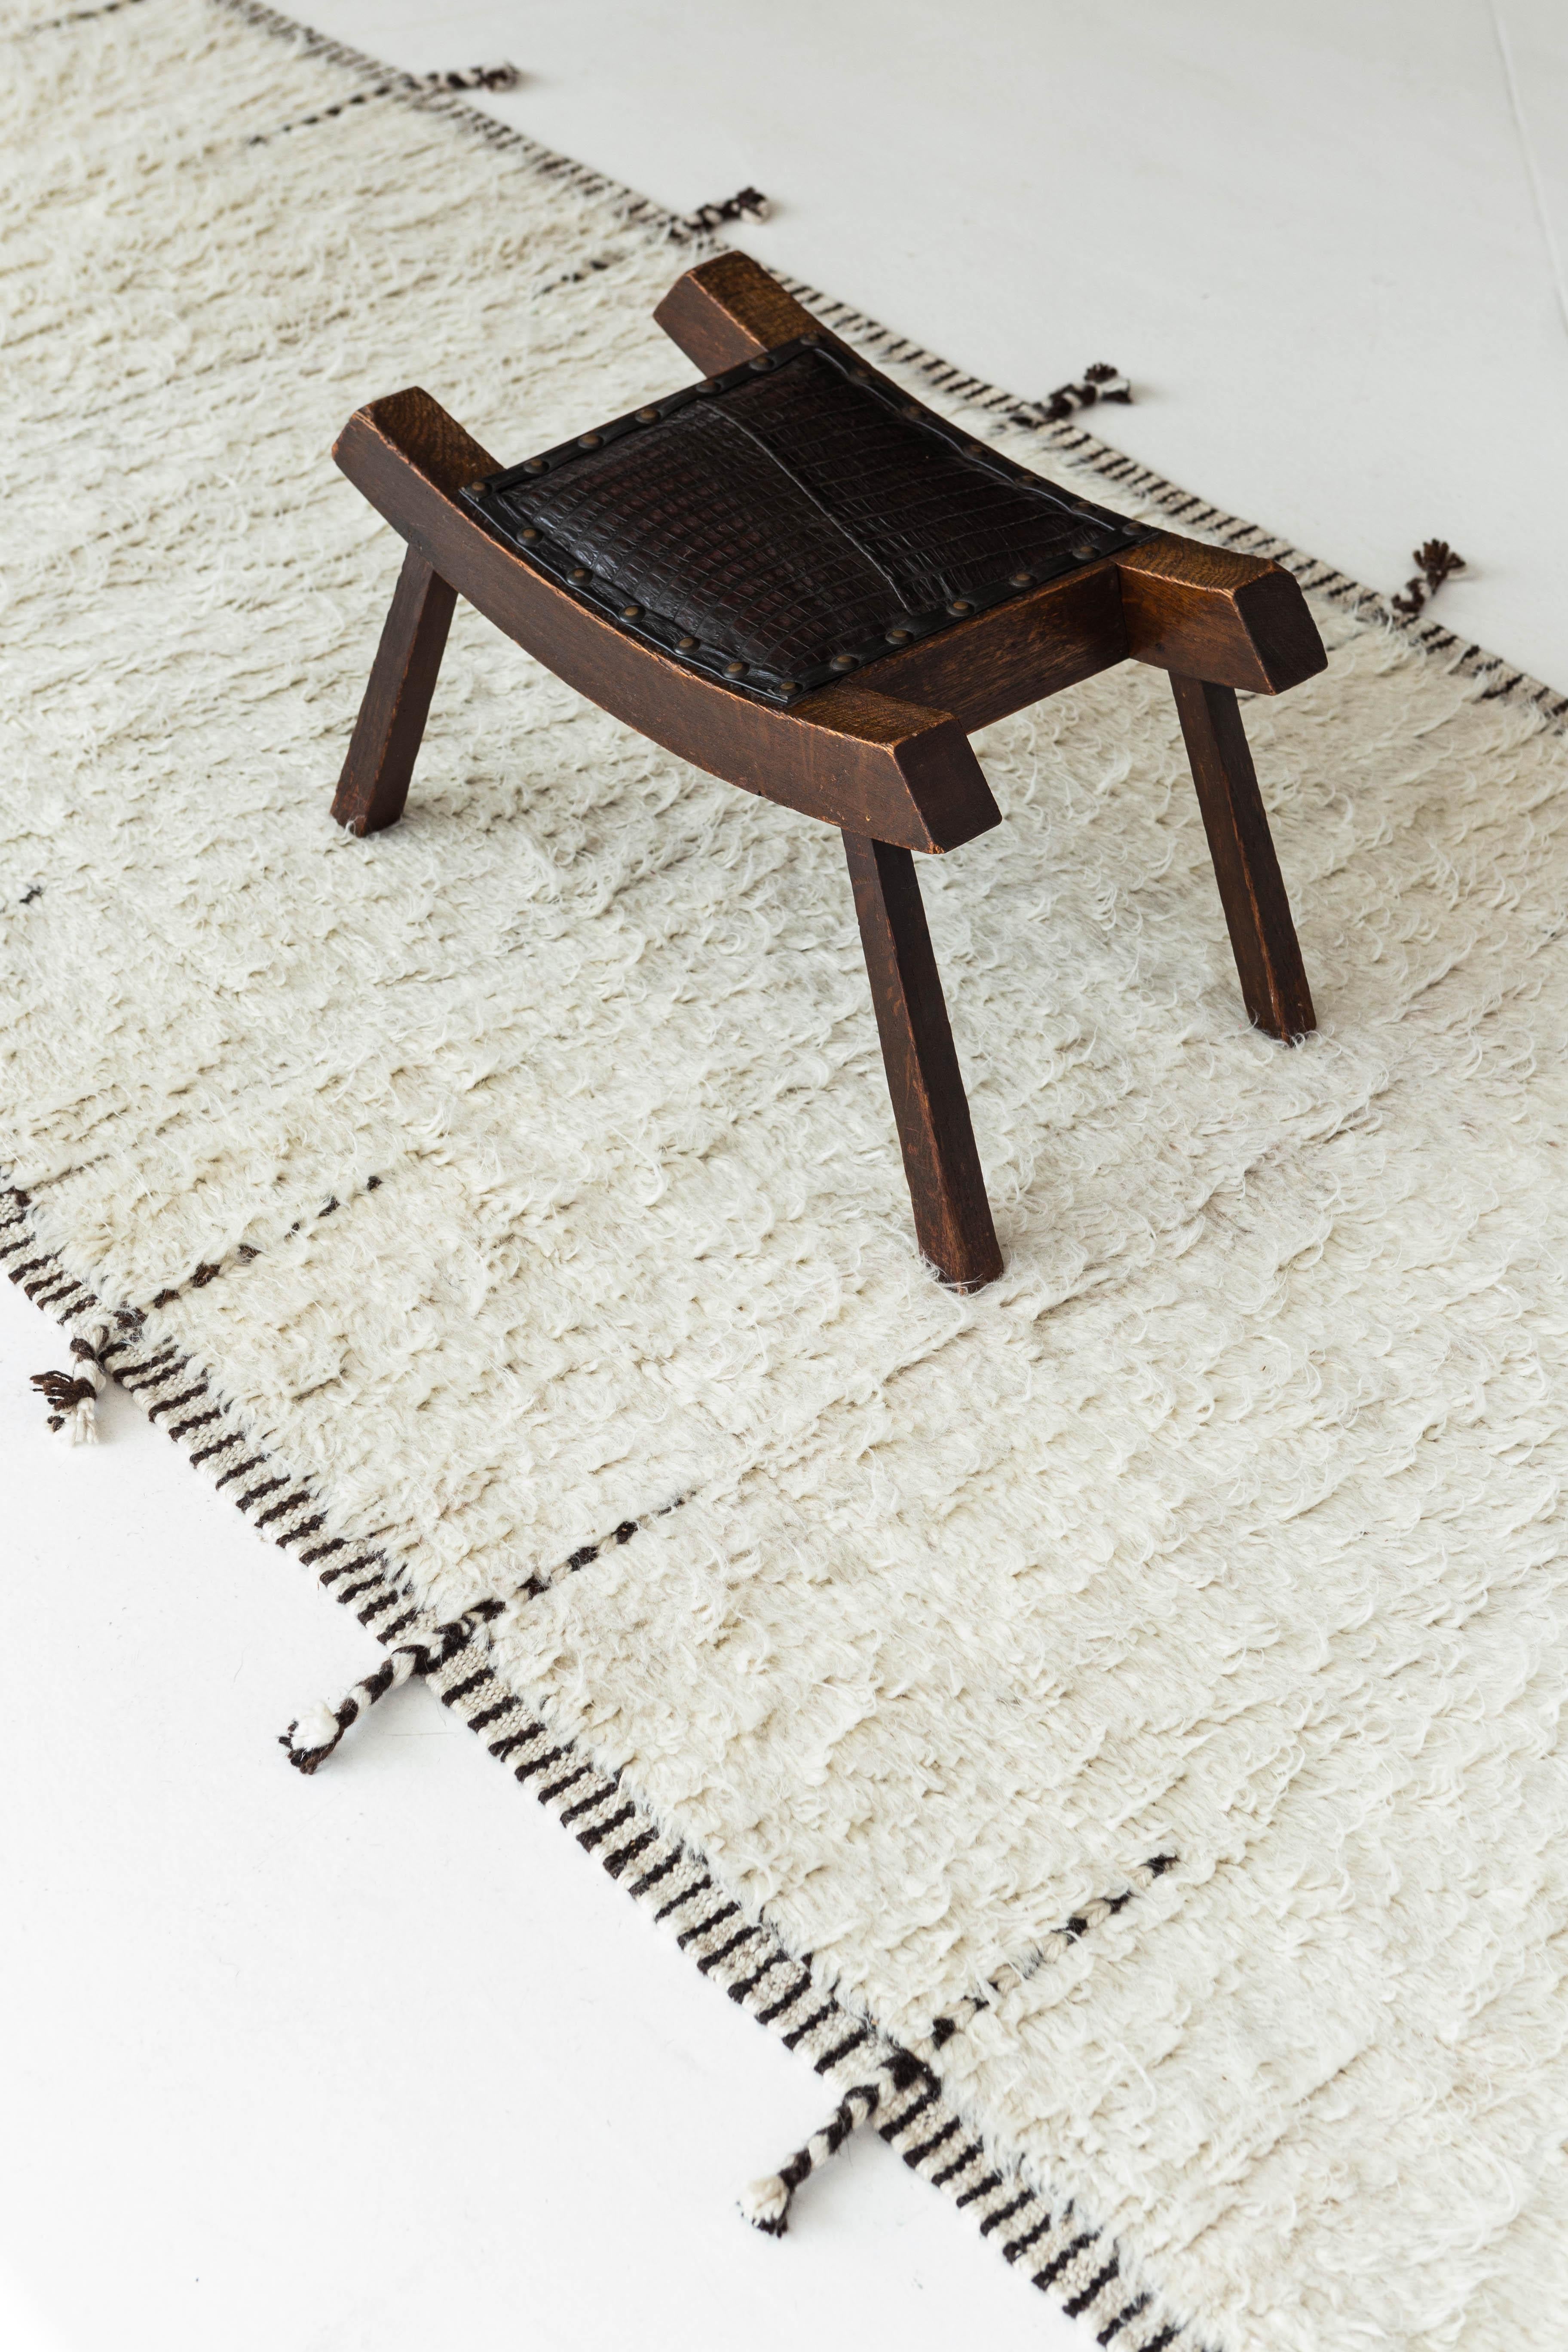 The perfect ivory color handwoven wool area rug to accommodate many spaces. This timeless design was built to withstand high amounts of foot traffic. The Haute Bohemian collection is designed in Los Angeles and named for the winds knitting together